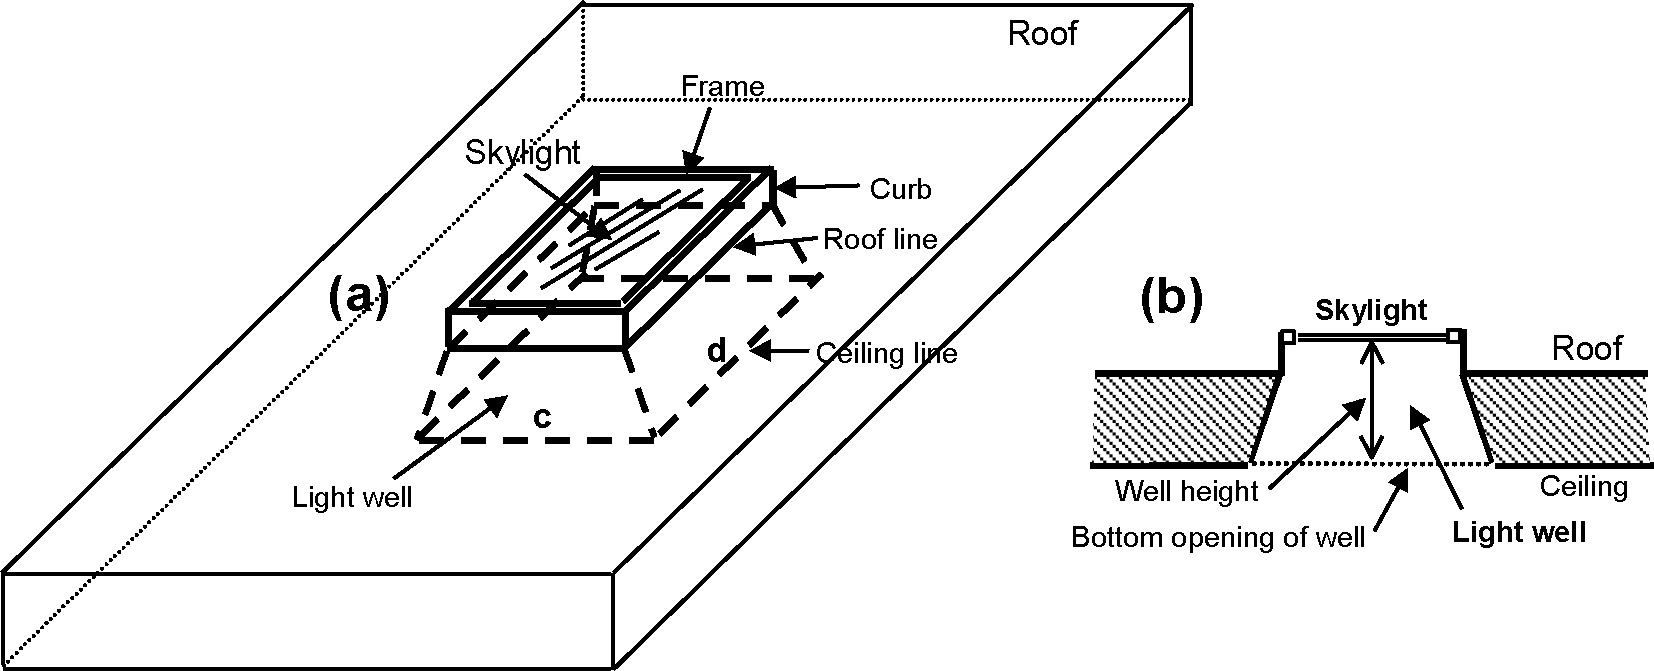 Skylight with light well: (a) perspective view, (b) vertical section. If the bottom of the light well is a rectangle of side lengths c and d, as shown in (a), then the perimeter of the bottom of the well = 2(c+d) and the area = cd (see description of field names for the Light Well object).